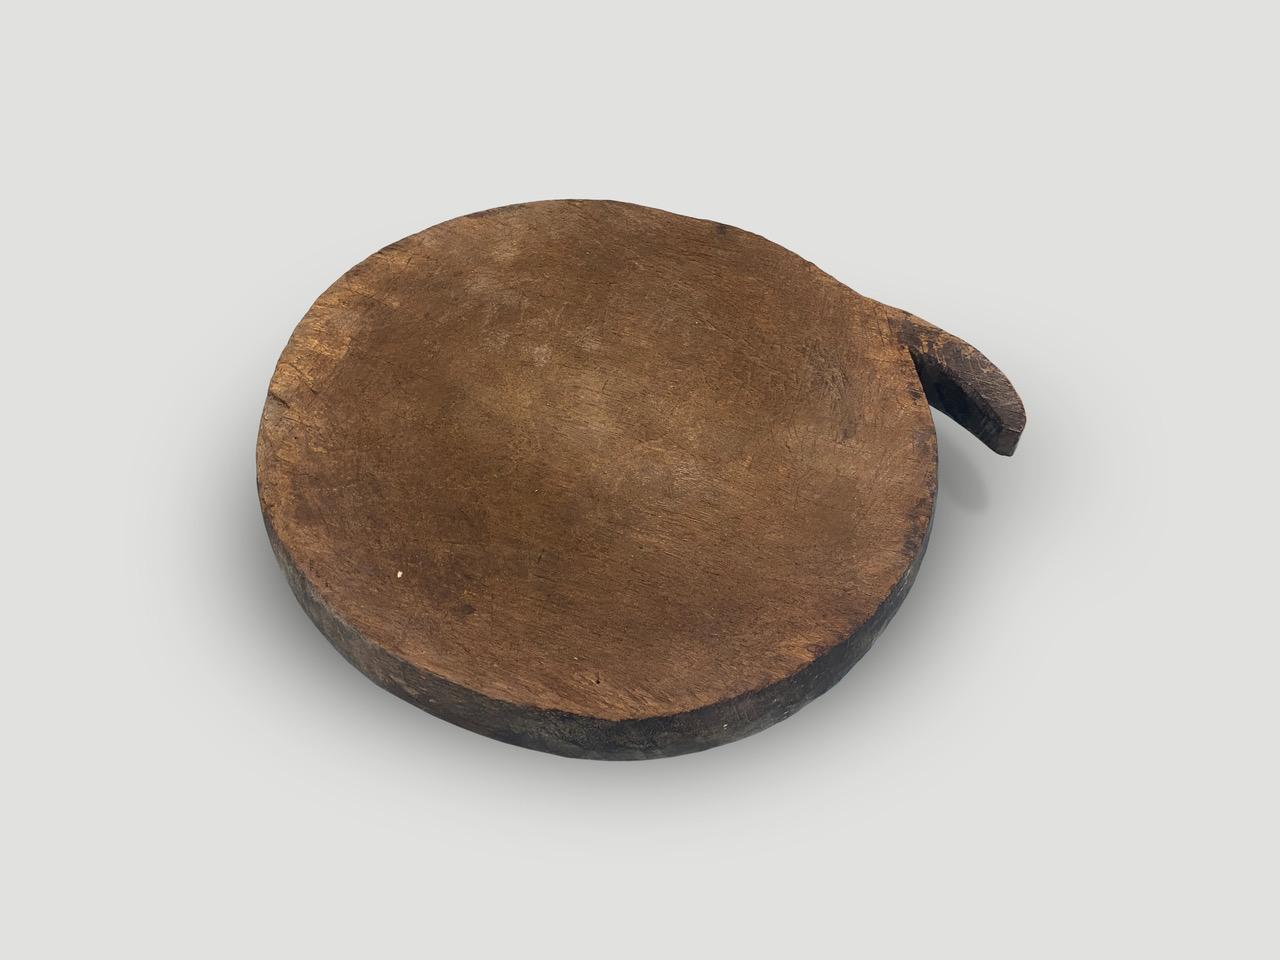 Beautiful wood platter hand carved out of a single piece of wood that works well as a cheese board.

This wood platter was handmade in the spirit of Wabi-Sabi, a Japanese philosophy that beauty can be found in imperfection and impermanence. It is